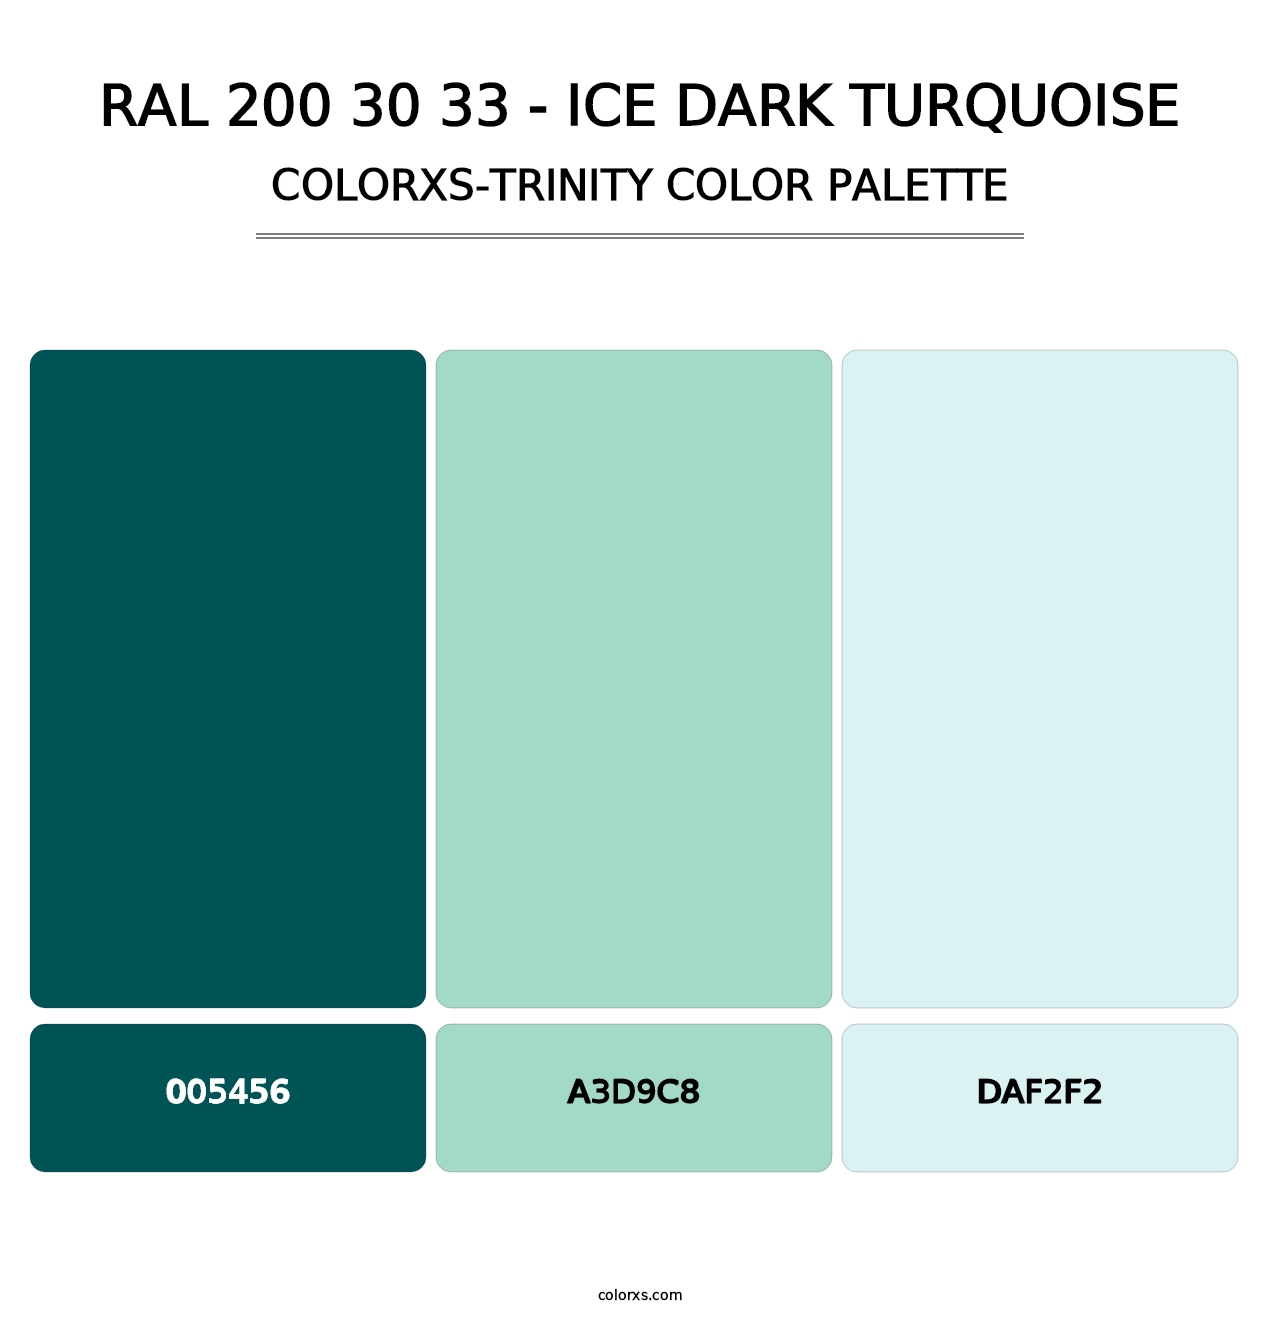 RAL 200 30 33 - Ice Dark Turquoise - Colorxs Trinity Palette